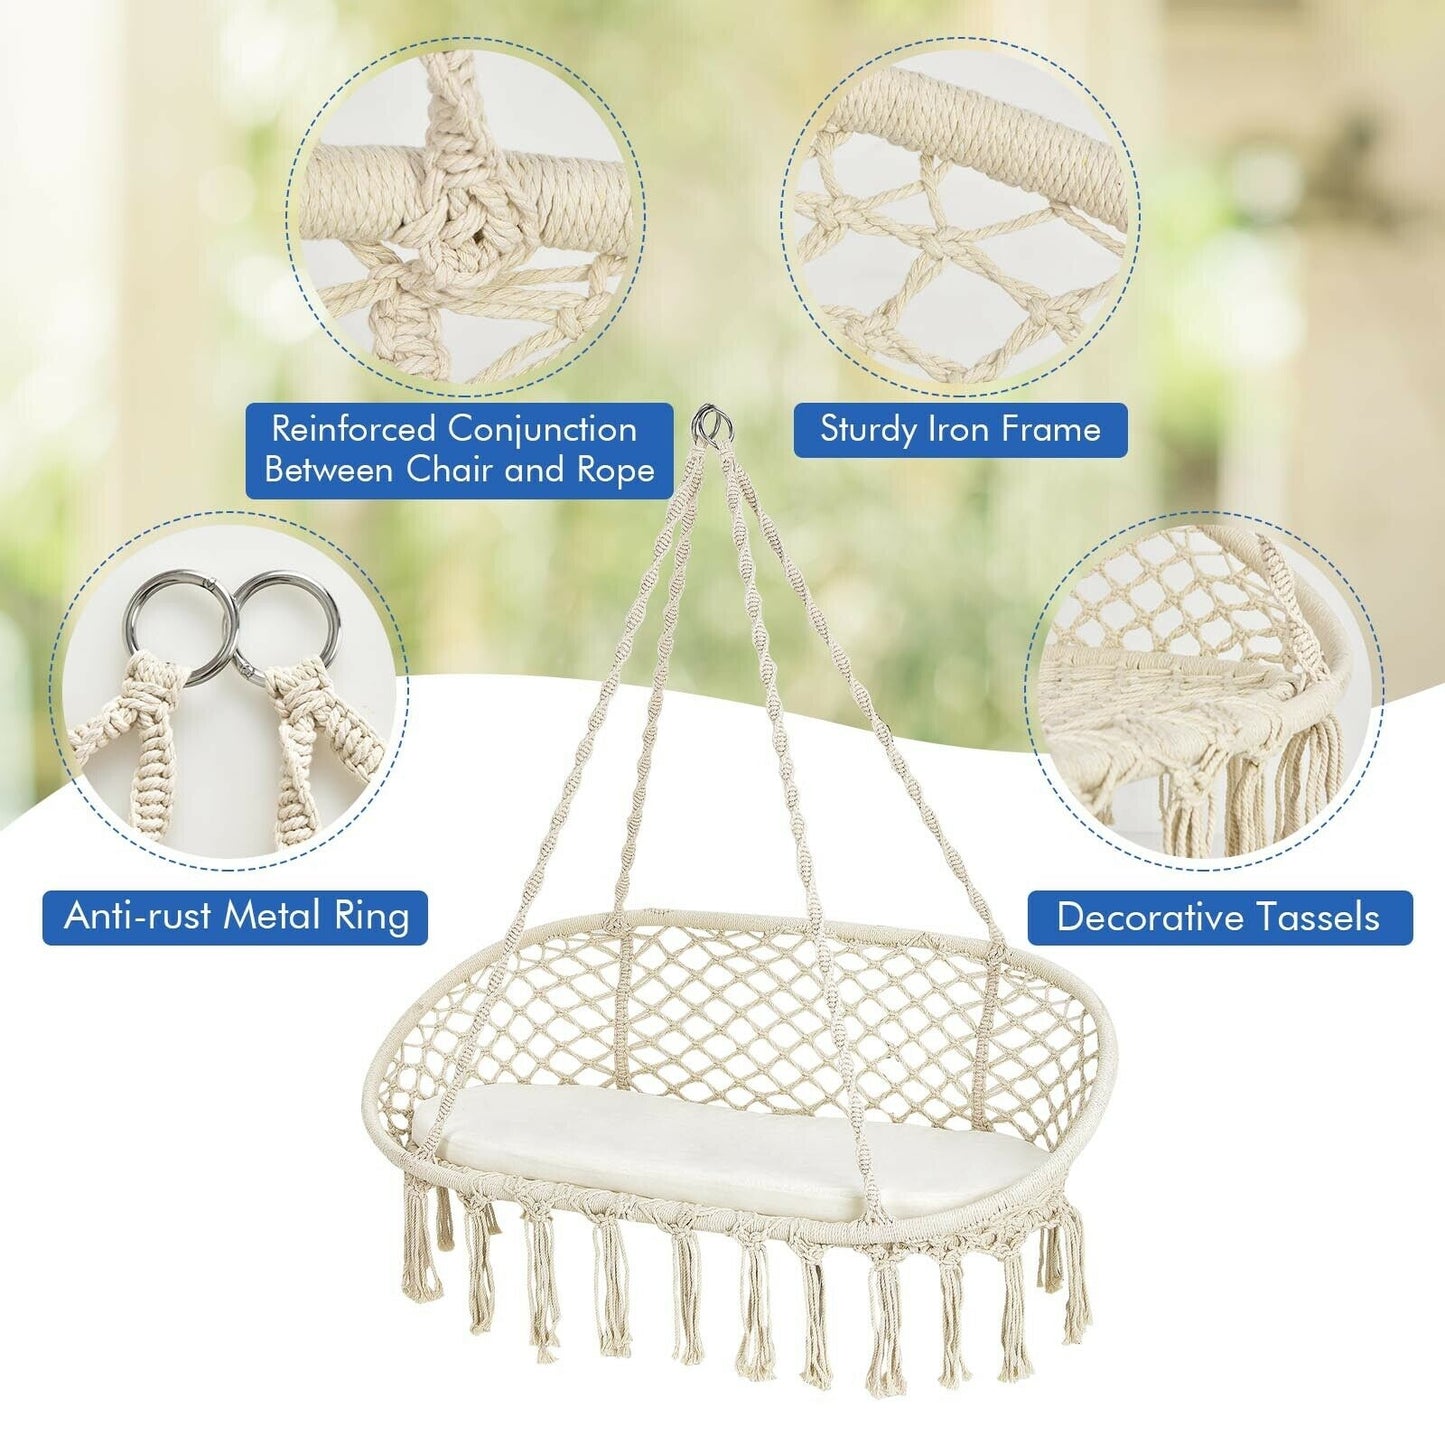 2 Person Hanging Hammock Chair with Cushion Macrame Swing-Beige